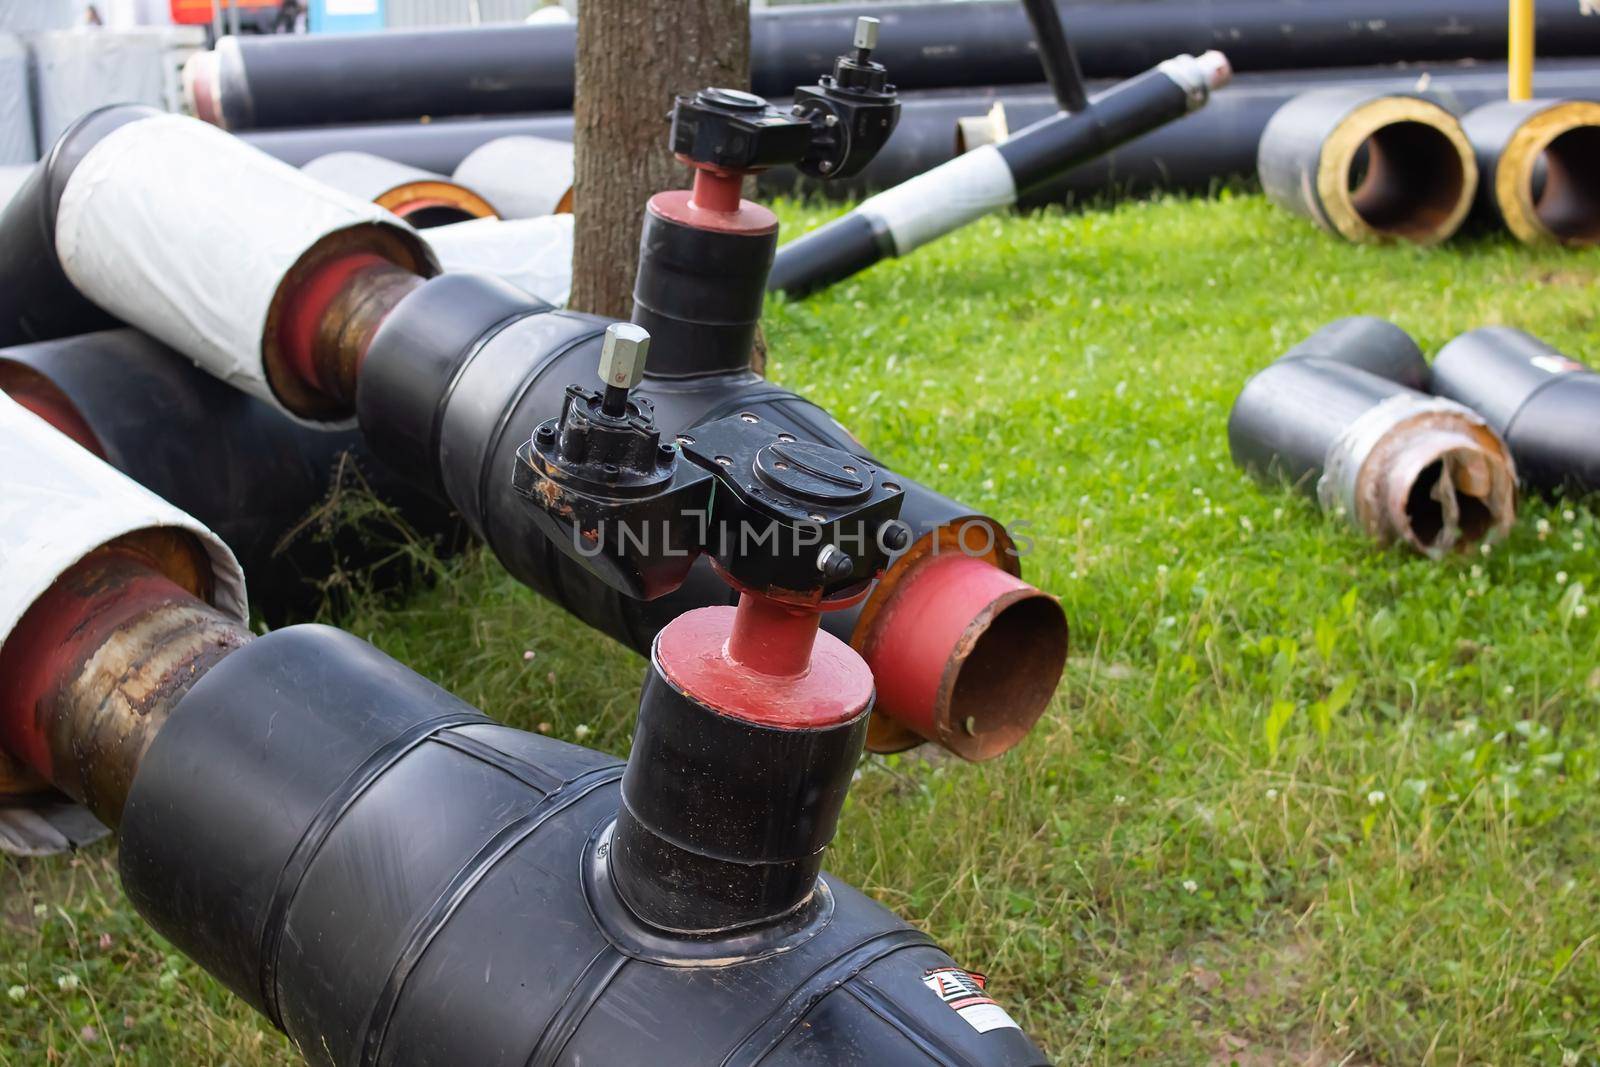 New pipes for water pipes with insulation on grass by Vera1703